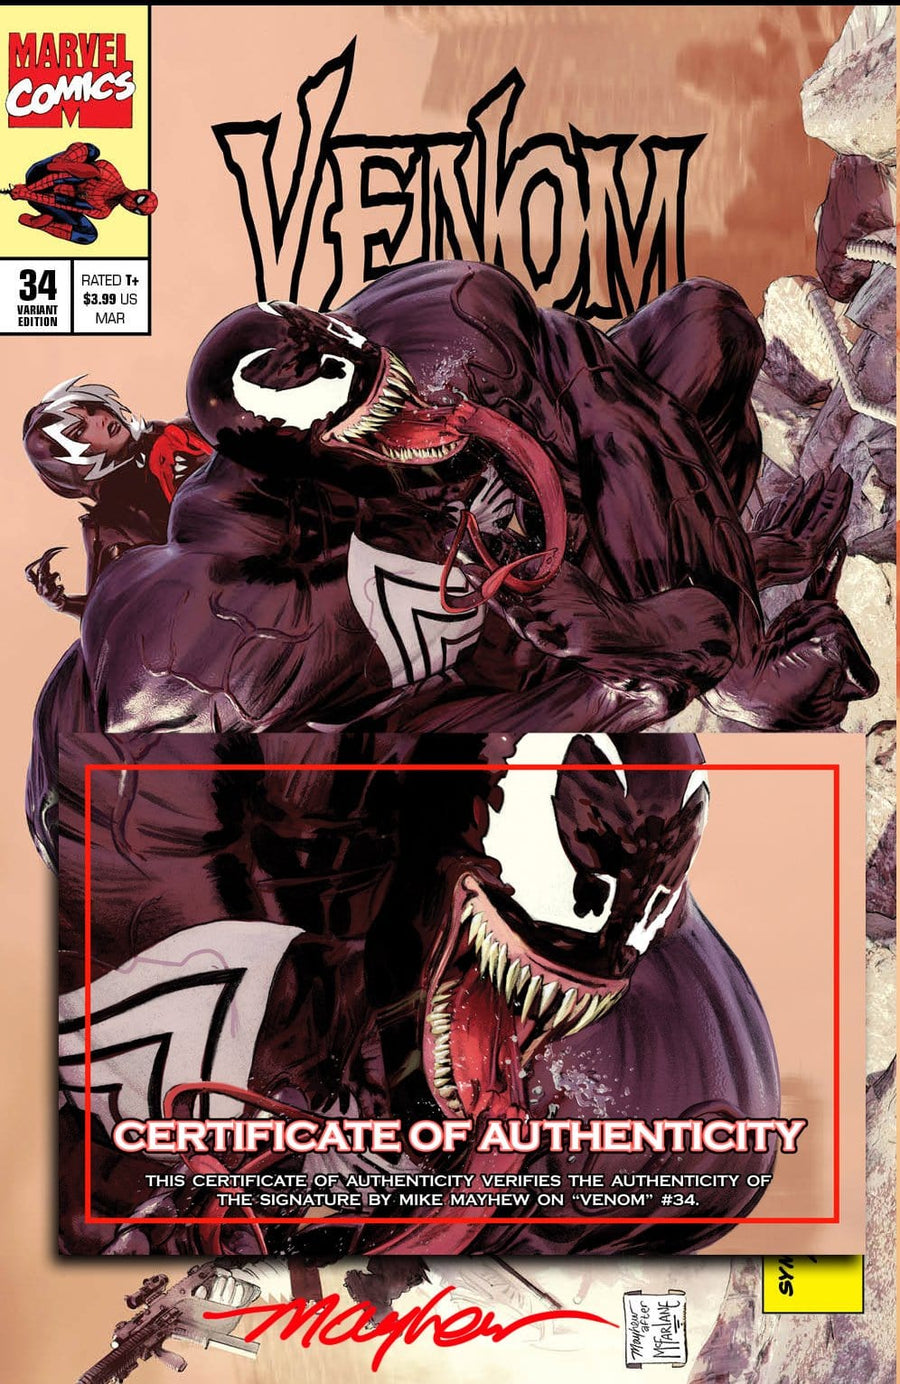 VENOM #34 Mike Mayhew Studio Variant Cover A Trade Dress Signed with COA